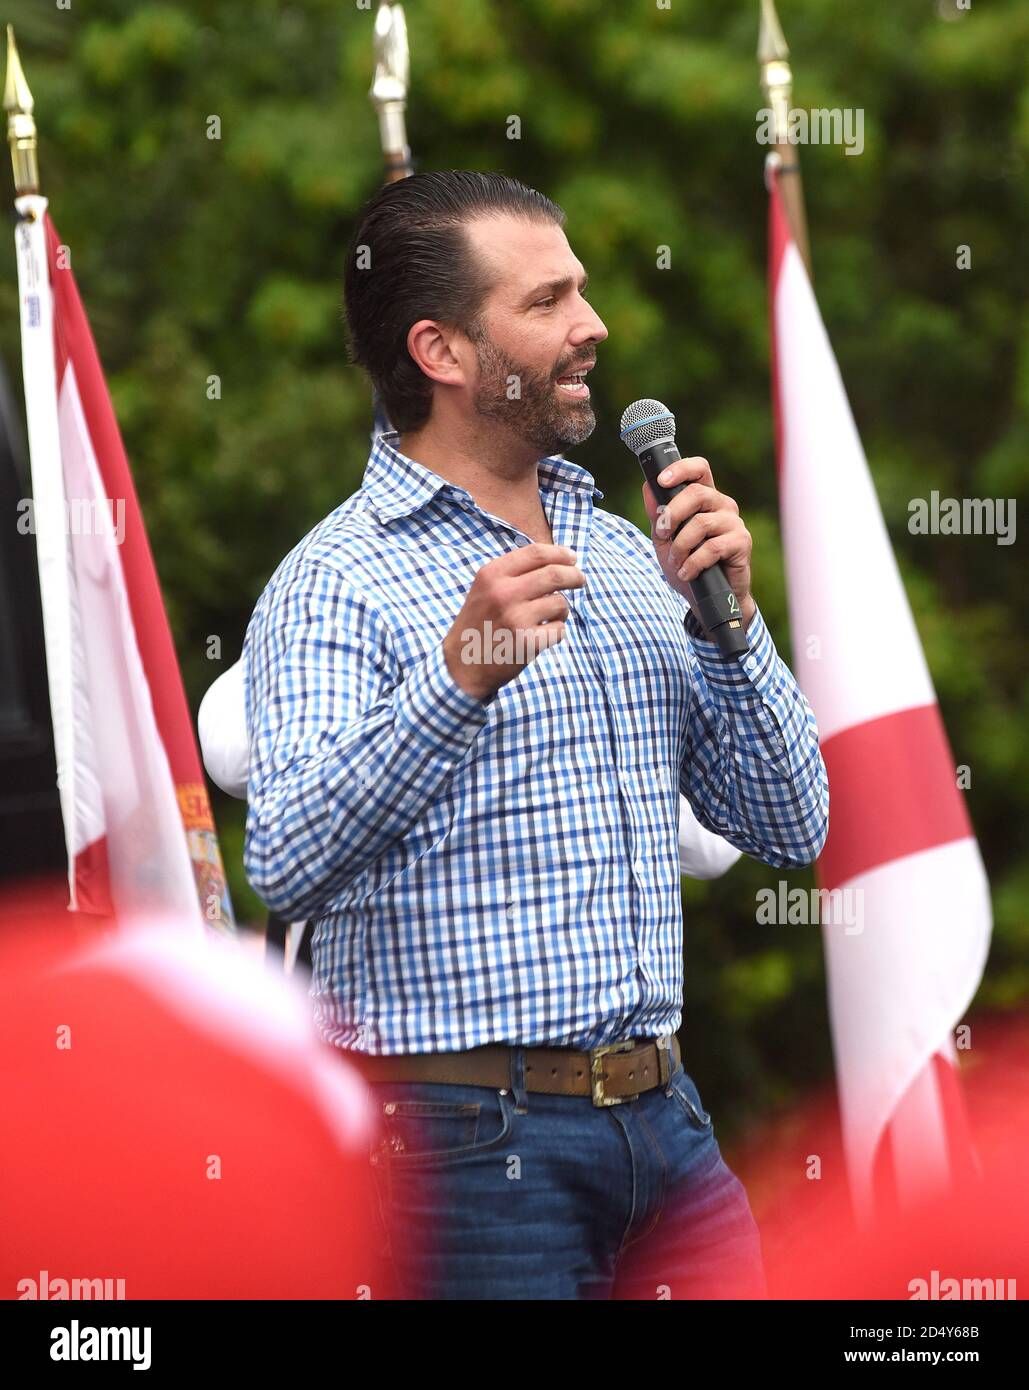 Orlando, Florida, USA. October 11, 2020 - Orlando, Florida, United States - Donald Trump Jr. speaks at a Fighters Against Socialism campaign rally in support of his father, U.S. President Donald Trump, on October 11, 2020 in Orlando, Florida. UFC fighter Jorge Masvidal also spoke at the rally. (Paul Hennessy/Alamy) Credit: Paul Hennessy/Alamy Live News Stock Photo